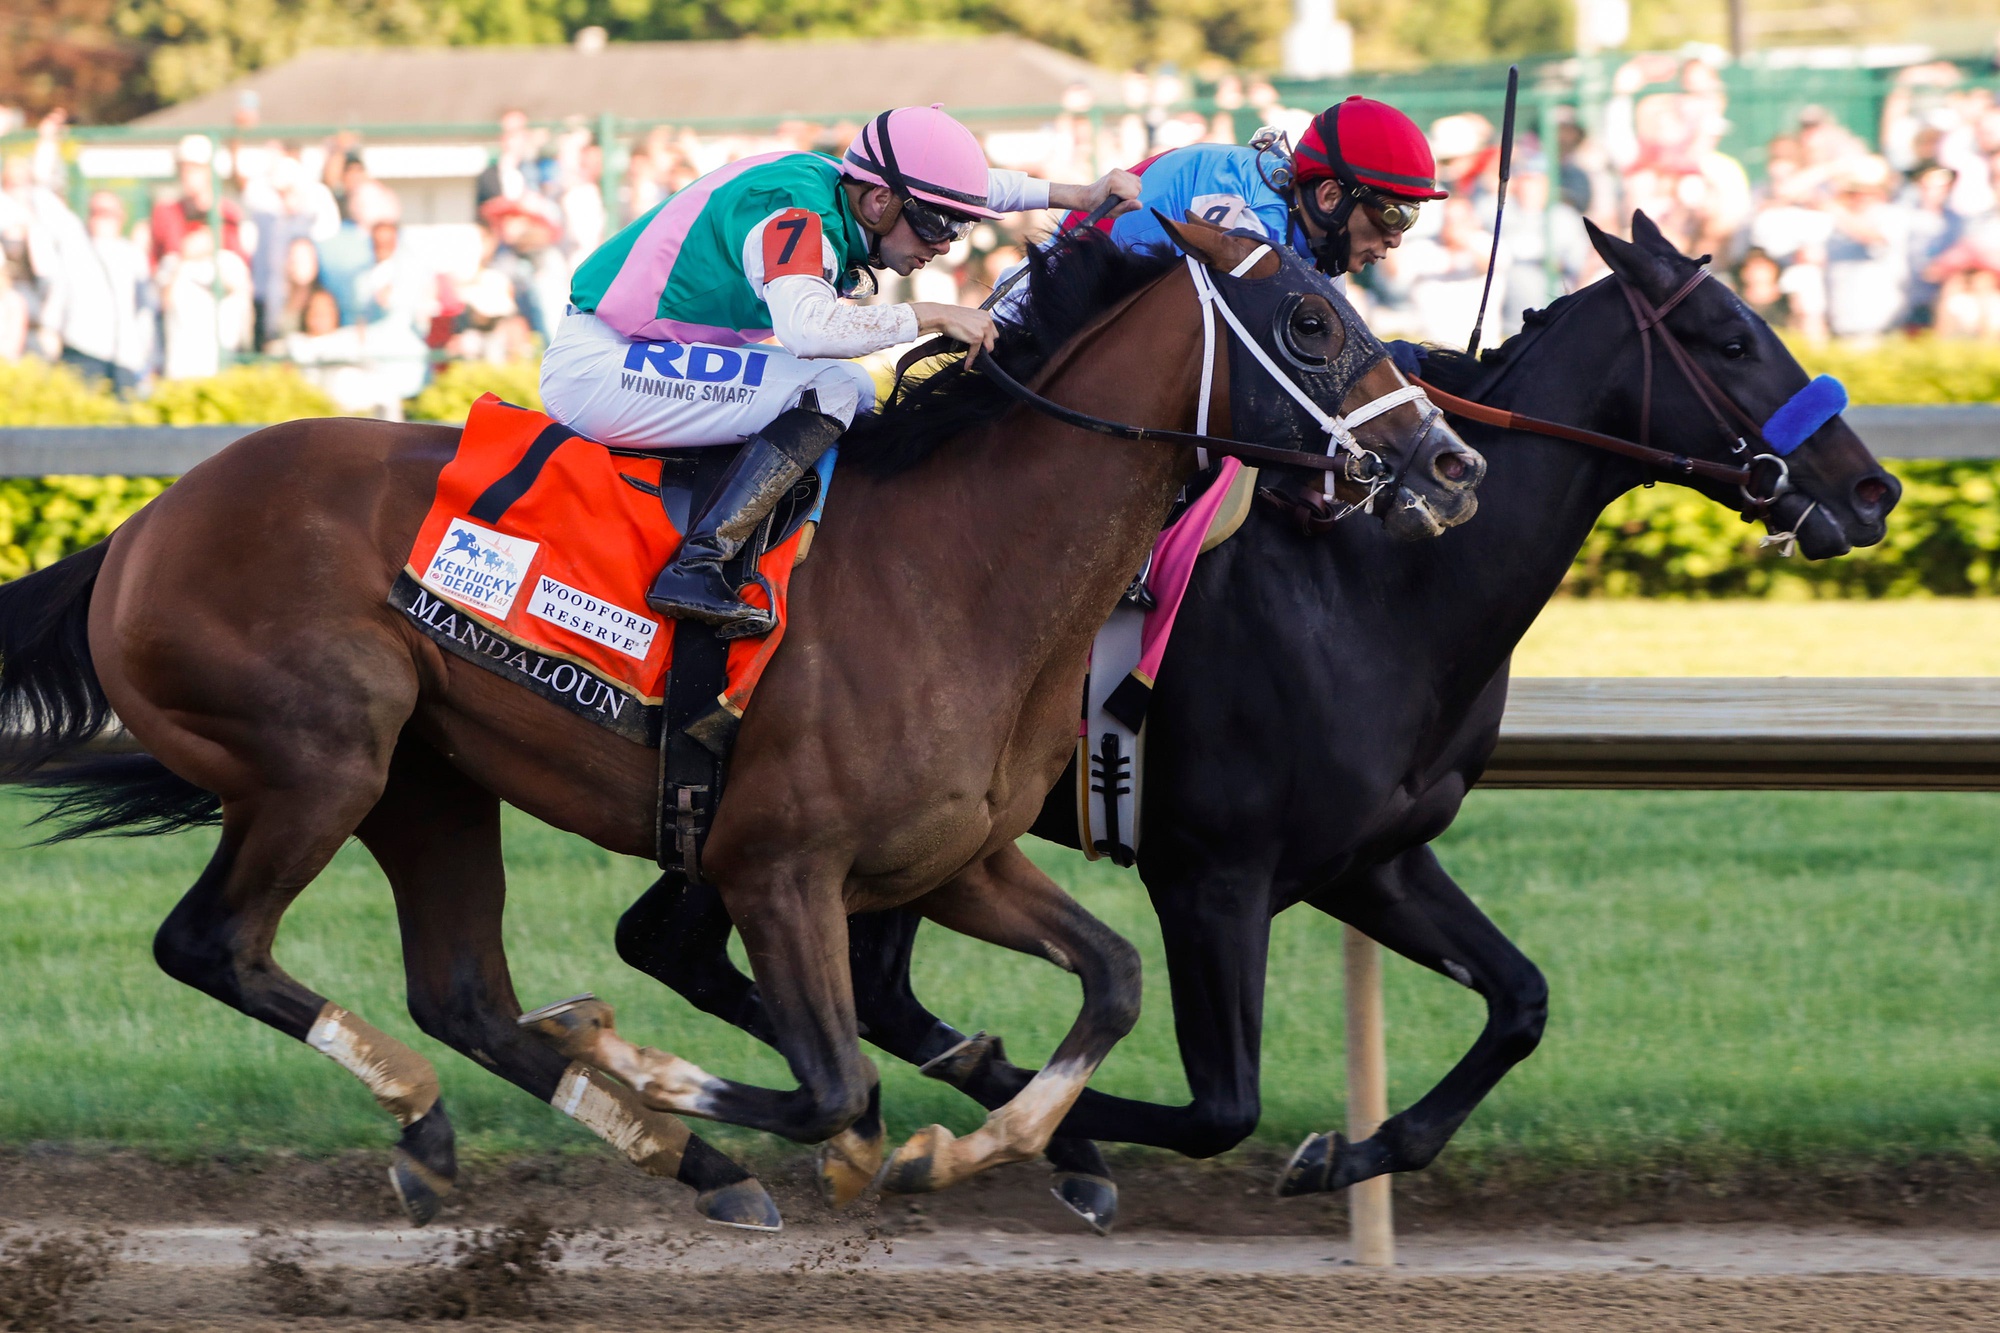 Medina Spirit and jockey John Velazquez, right, pull ahead of Mandaloun and jockey Florent Geroux in the final stretch in the Running of the 147th Kentucky Derby at Churchill Downs.